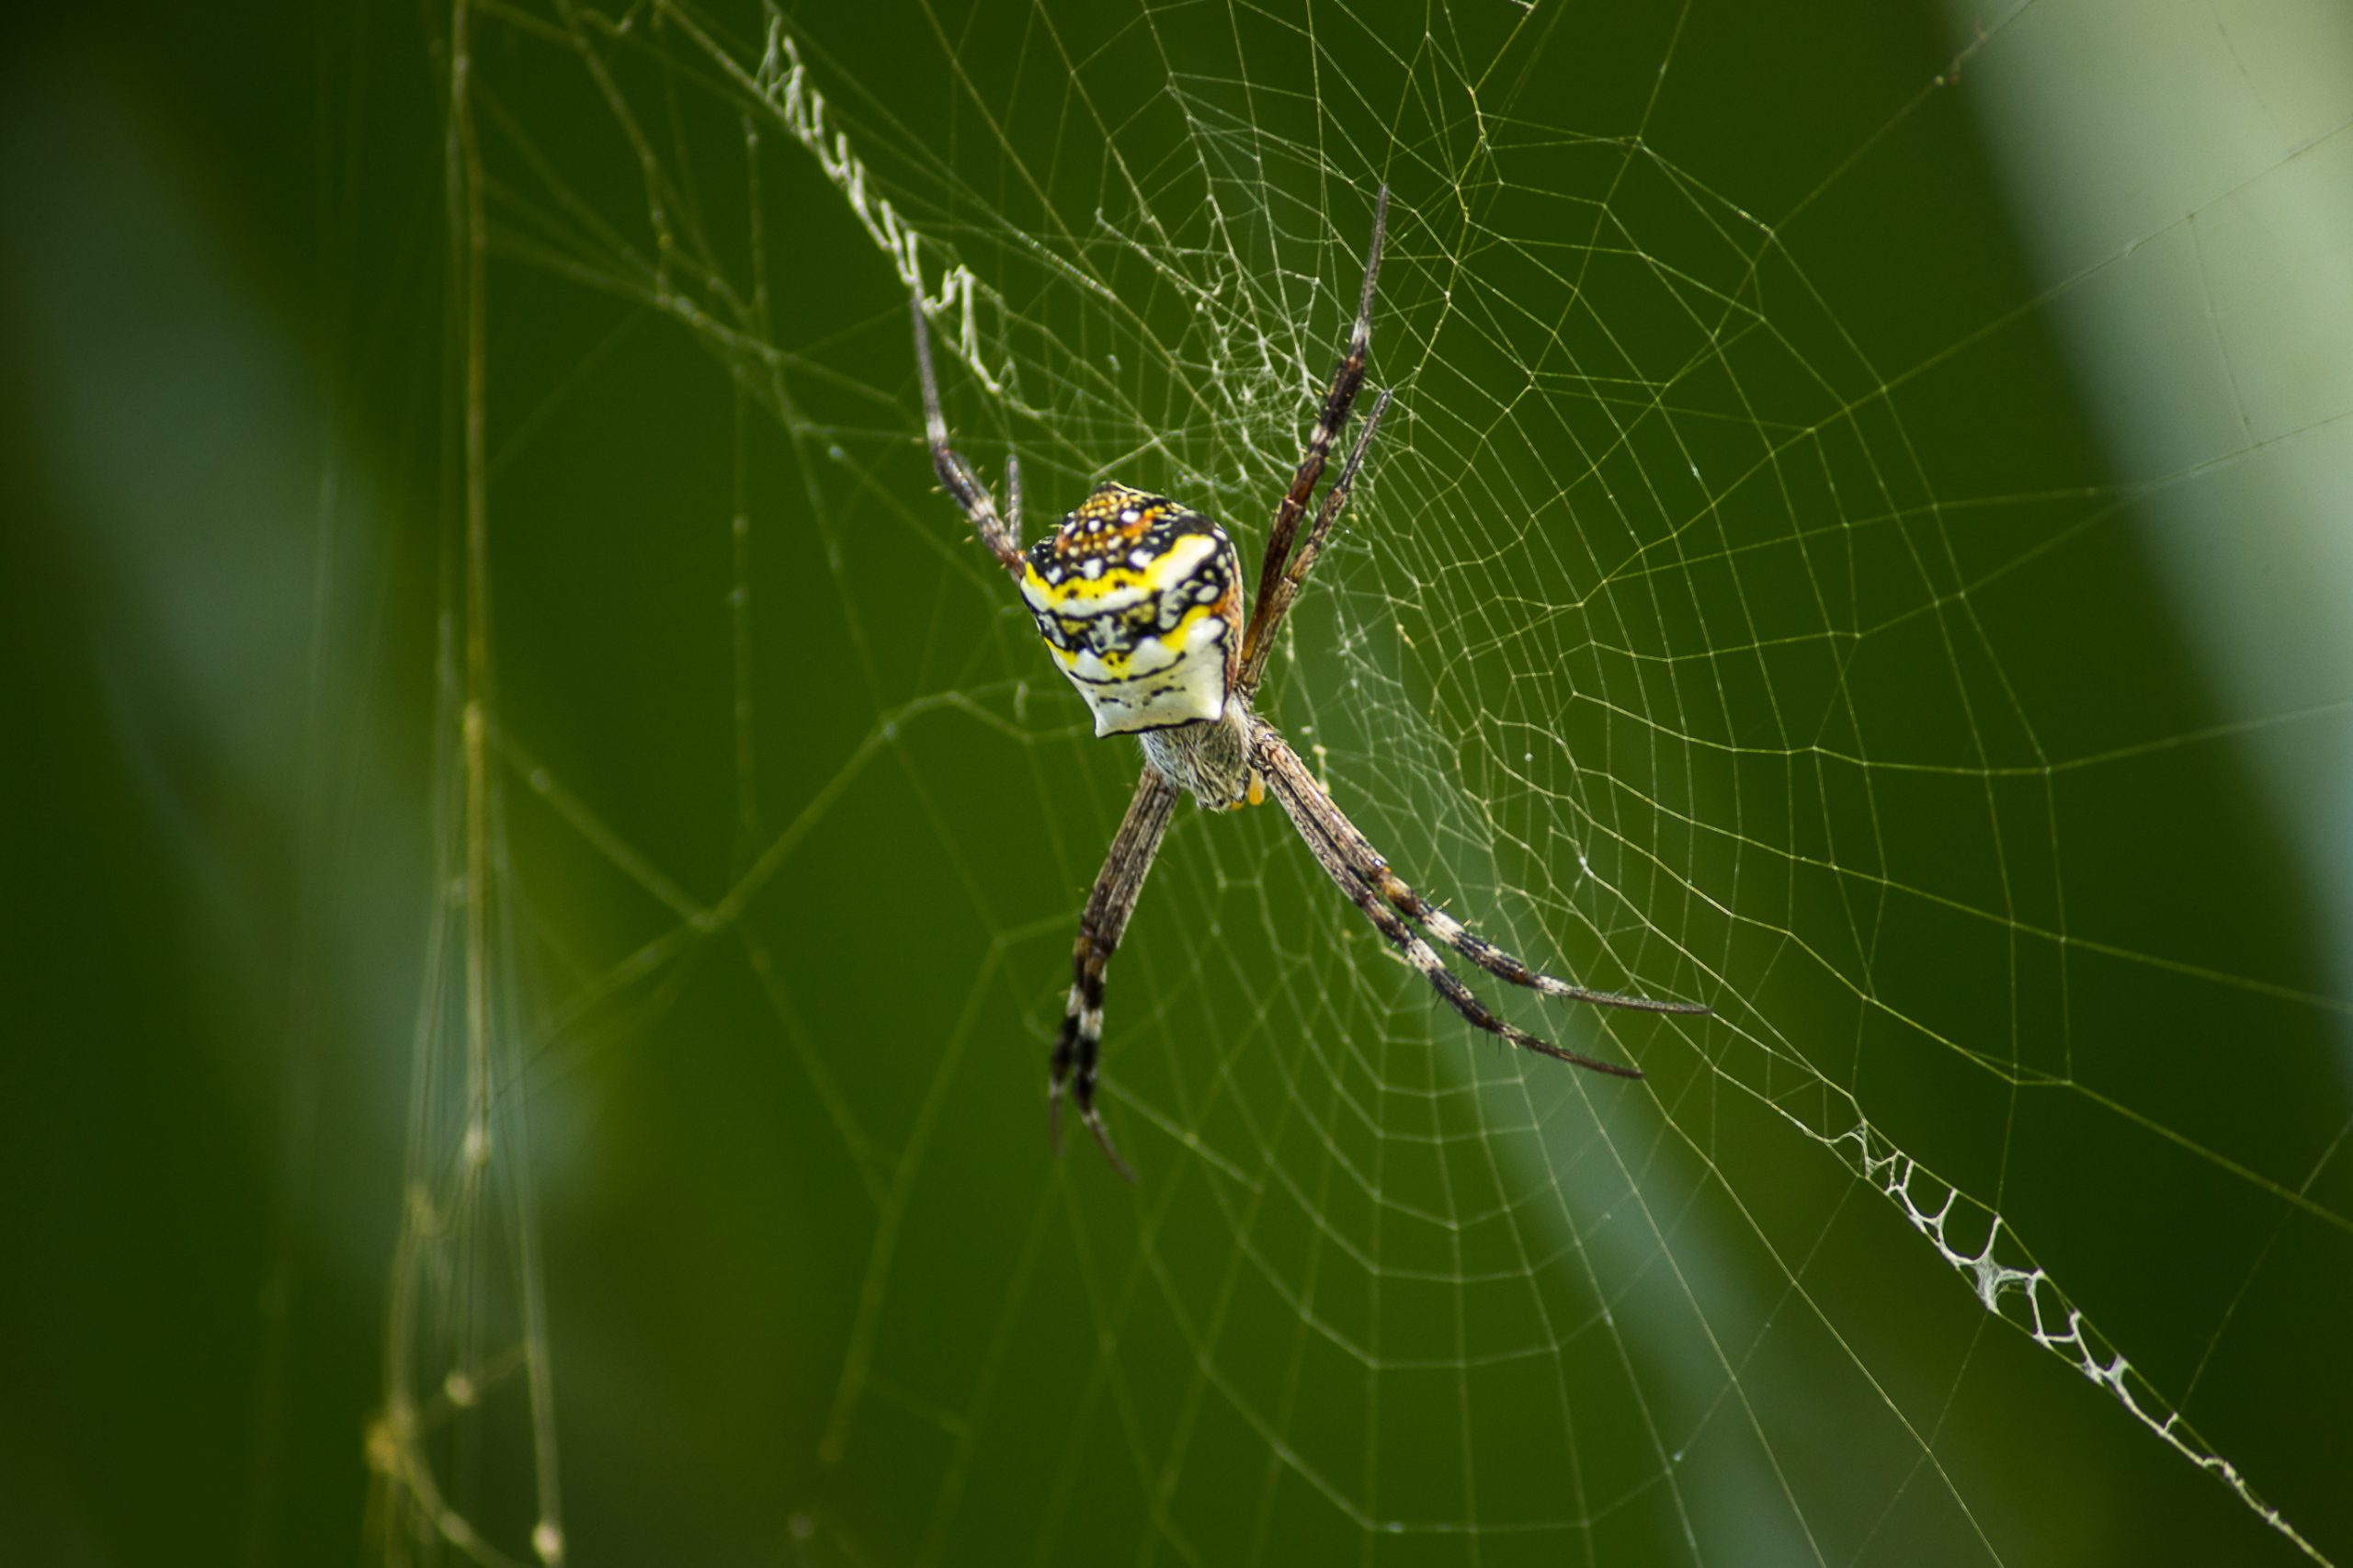 A spider in its web